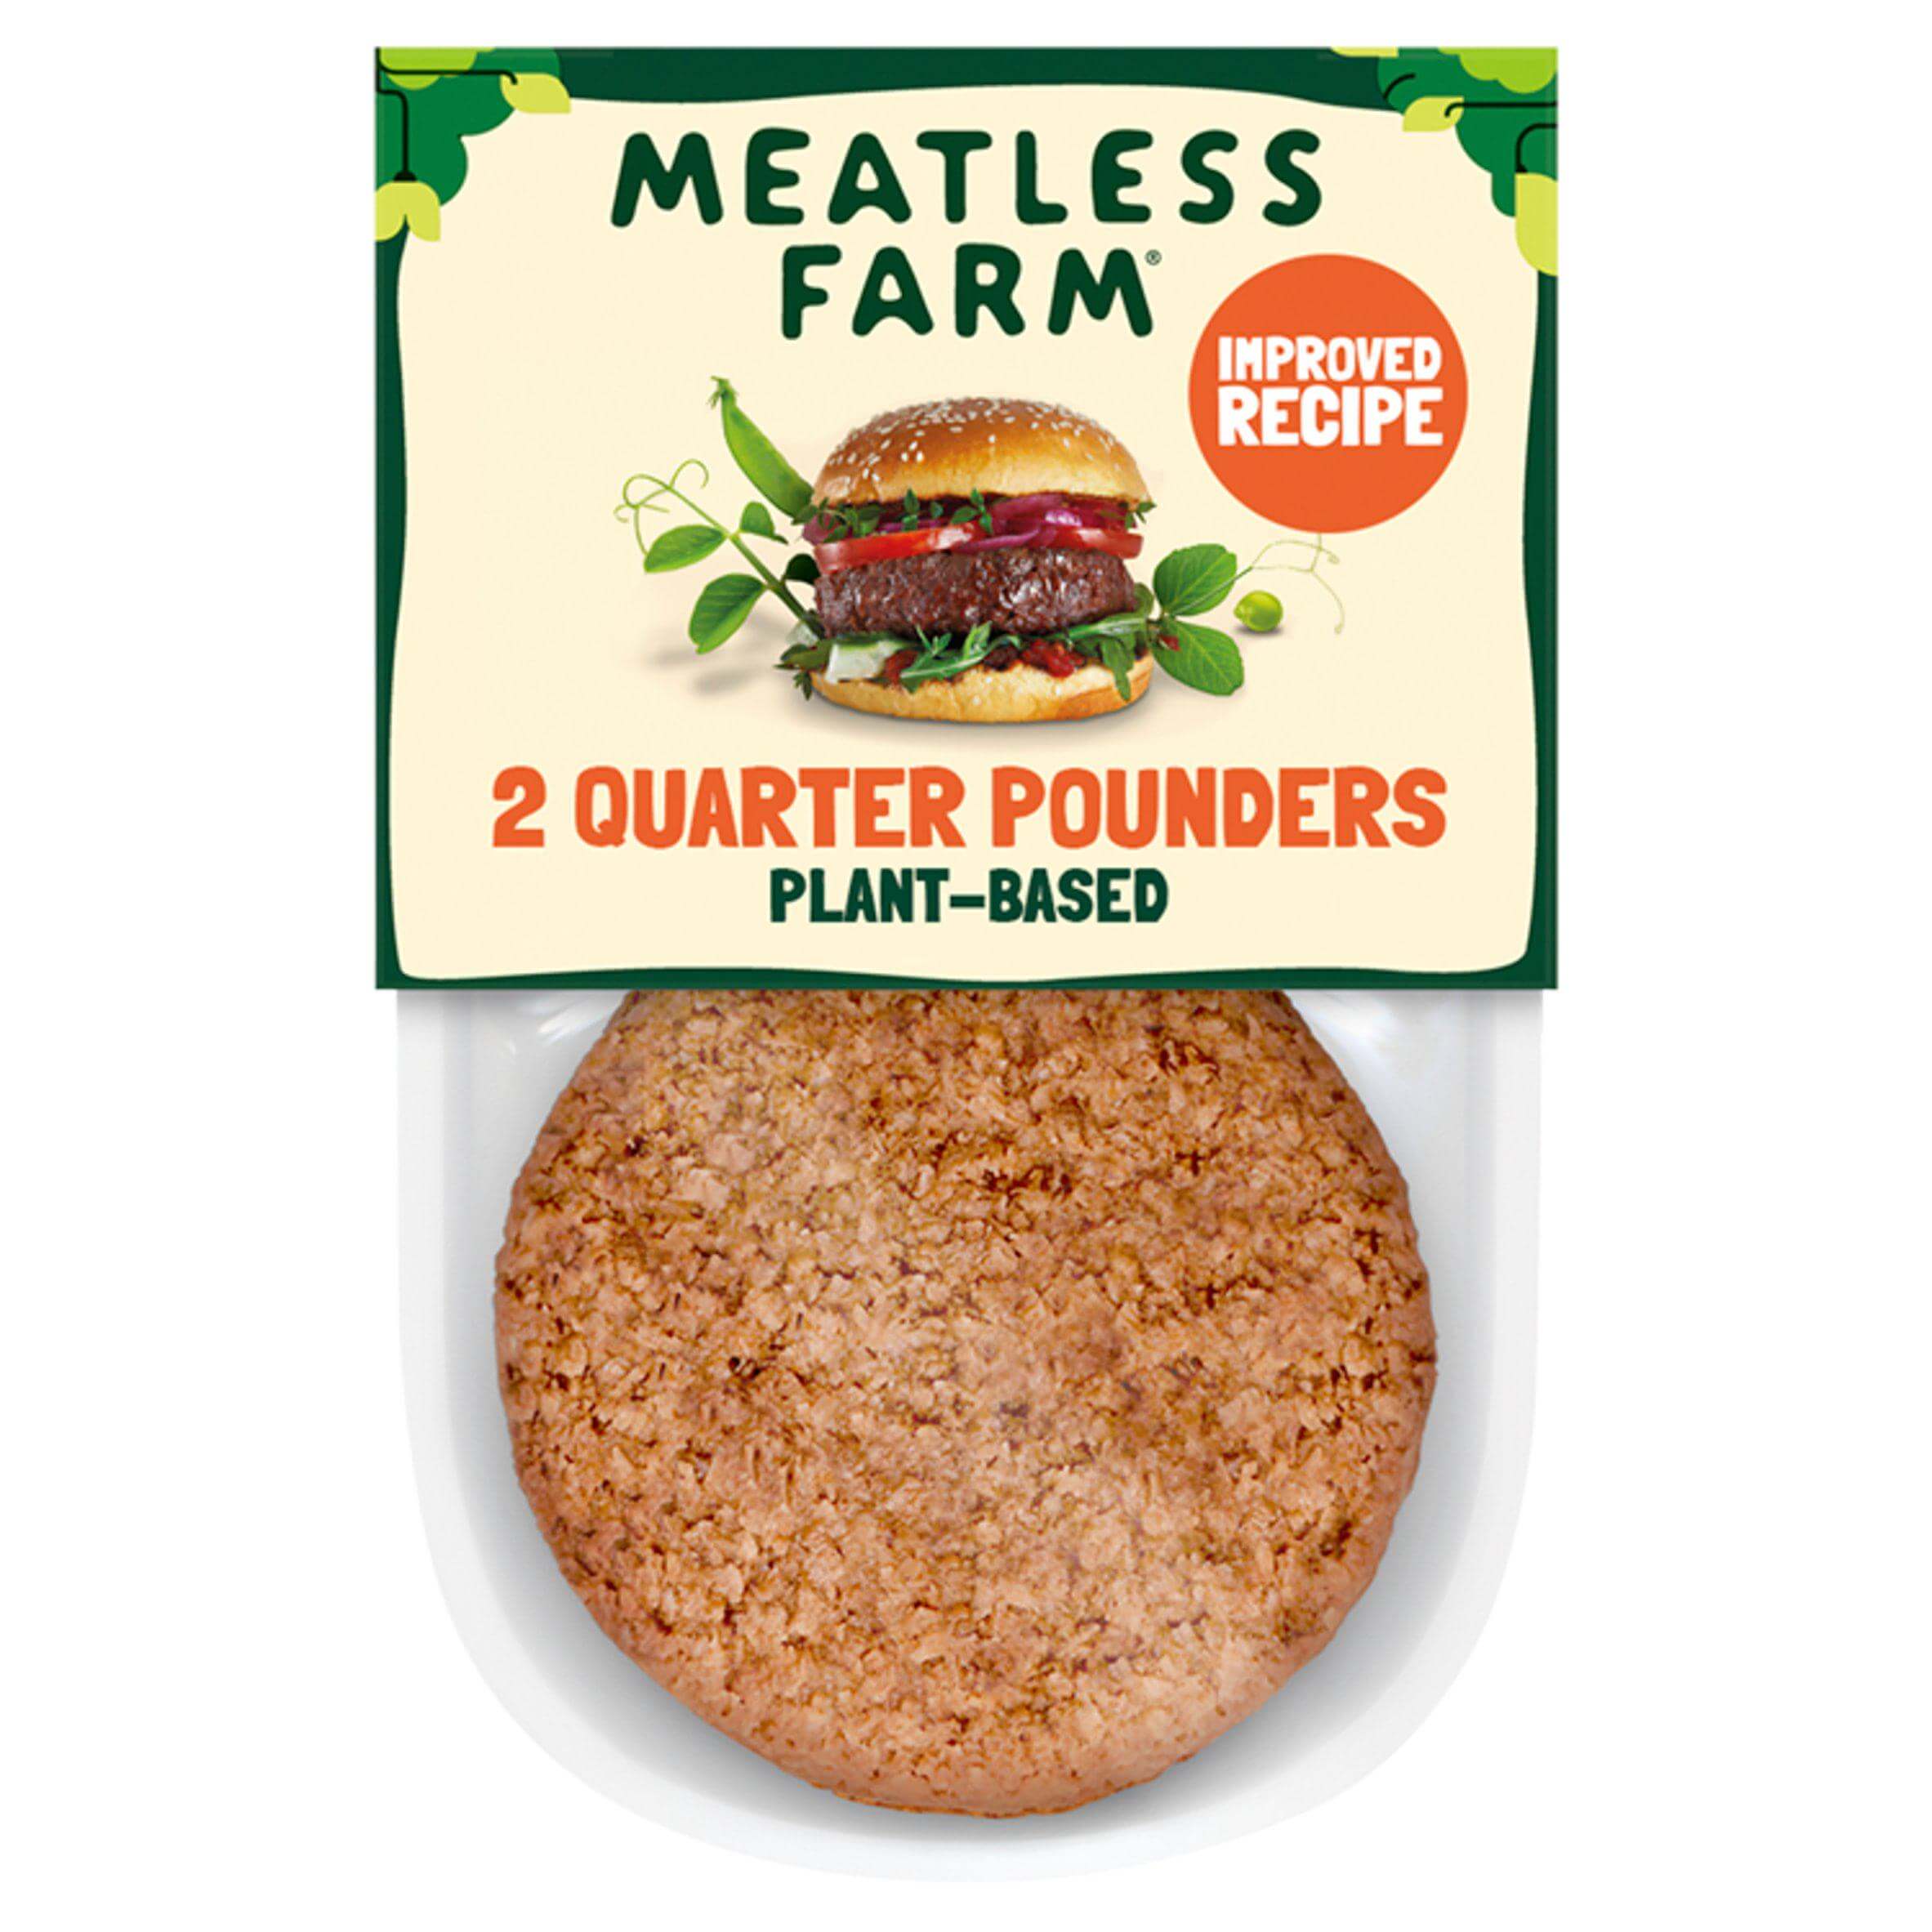 A glimpse of diverse products by The Meatless Farm Co., supporting the UK economy on YouK.